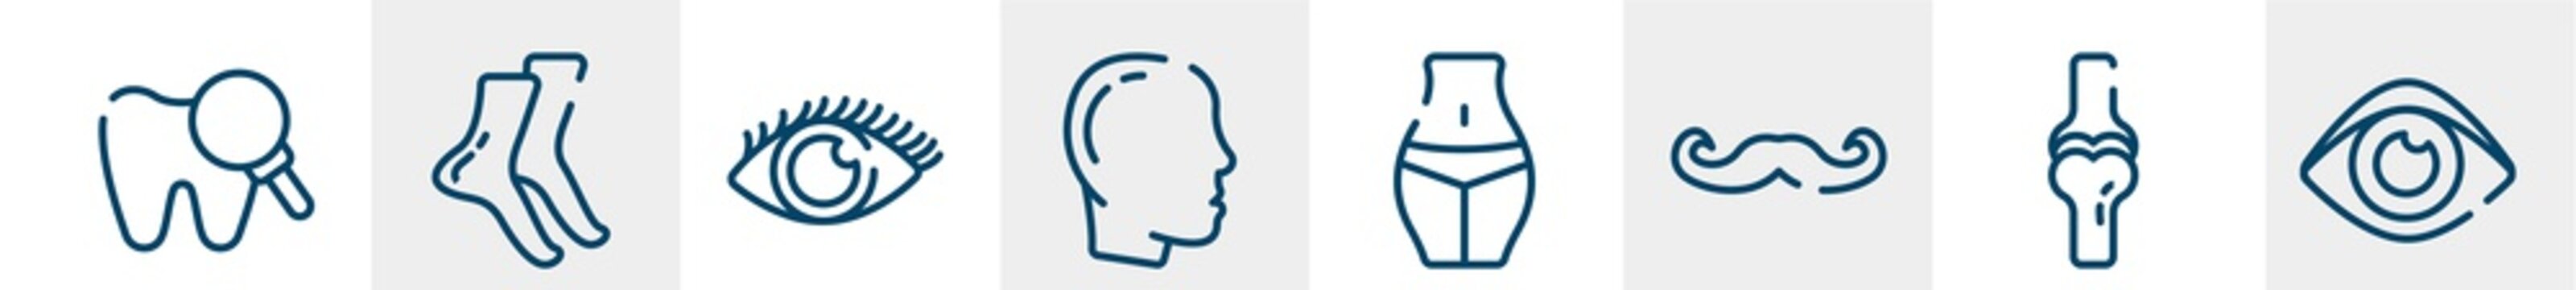 medical icons line icons such as zoom on tooth, tiptoe feet, eye with enlarged pupil, male with bald hair side view, female hips and waist, human eye shape outline vector sign. symbol, logo